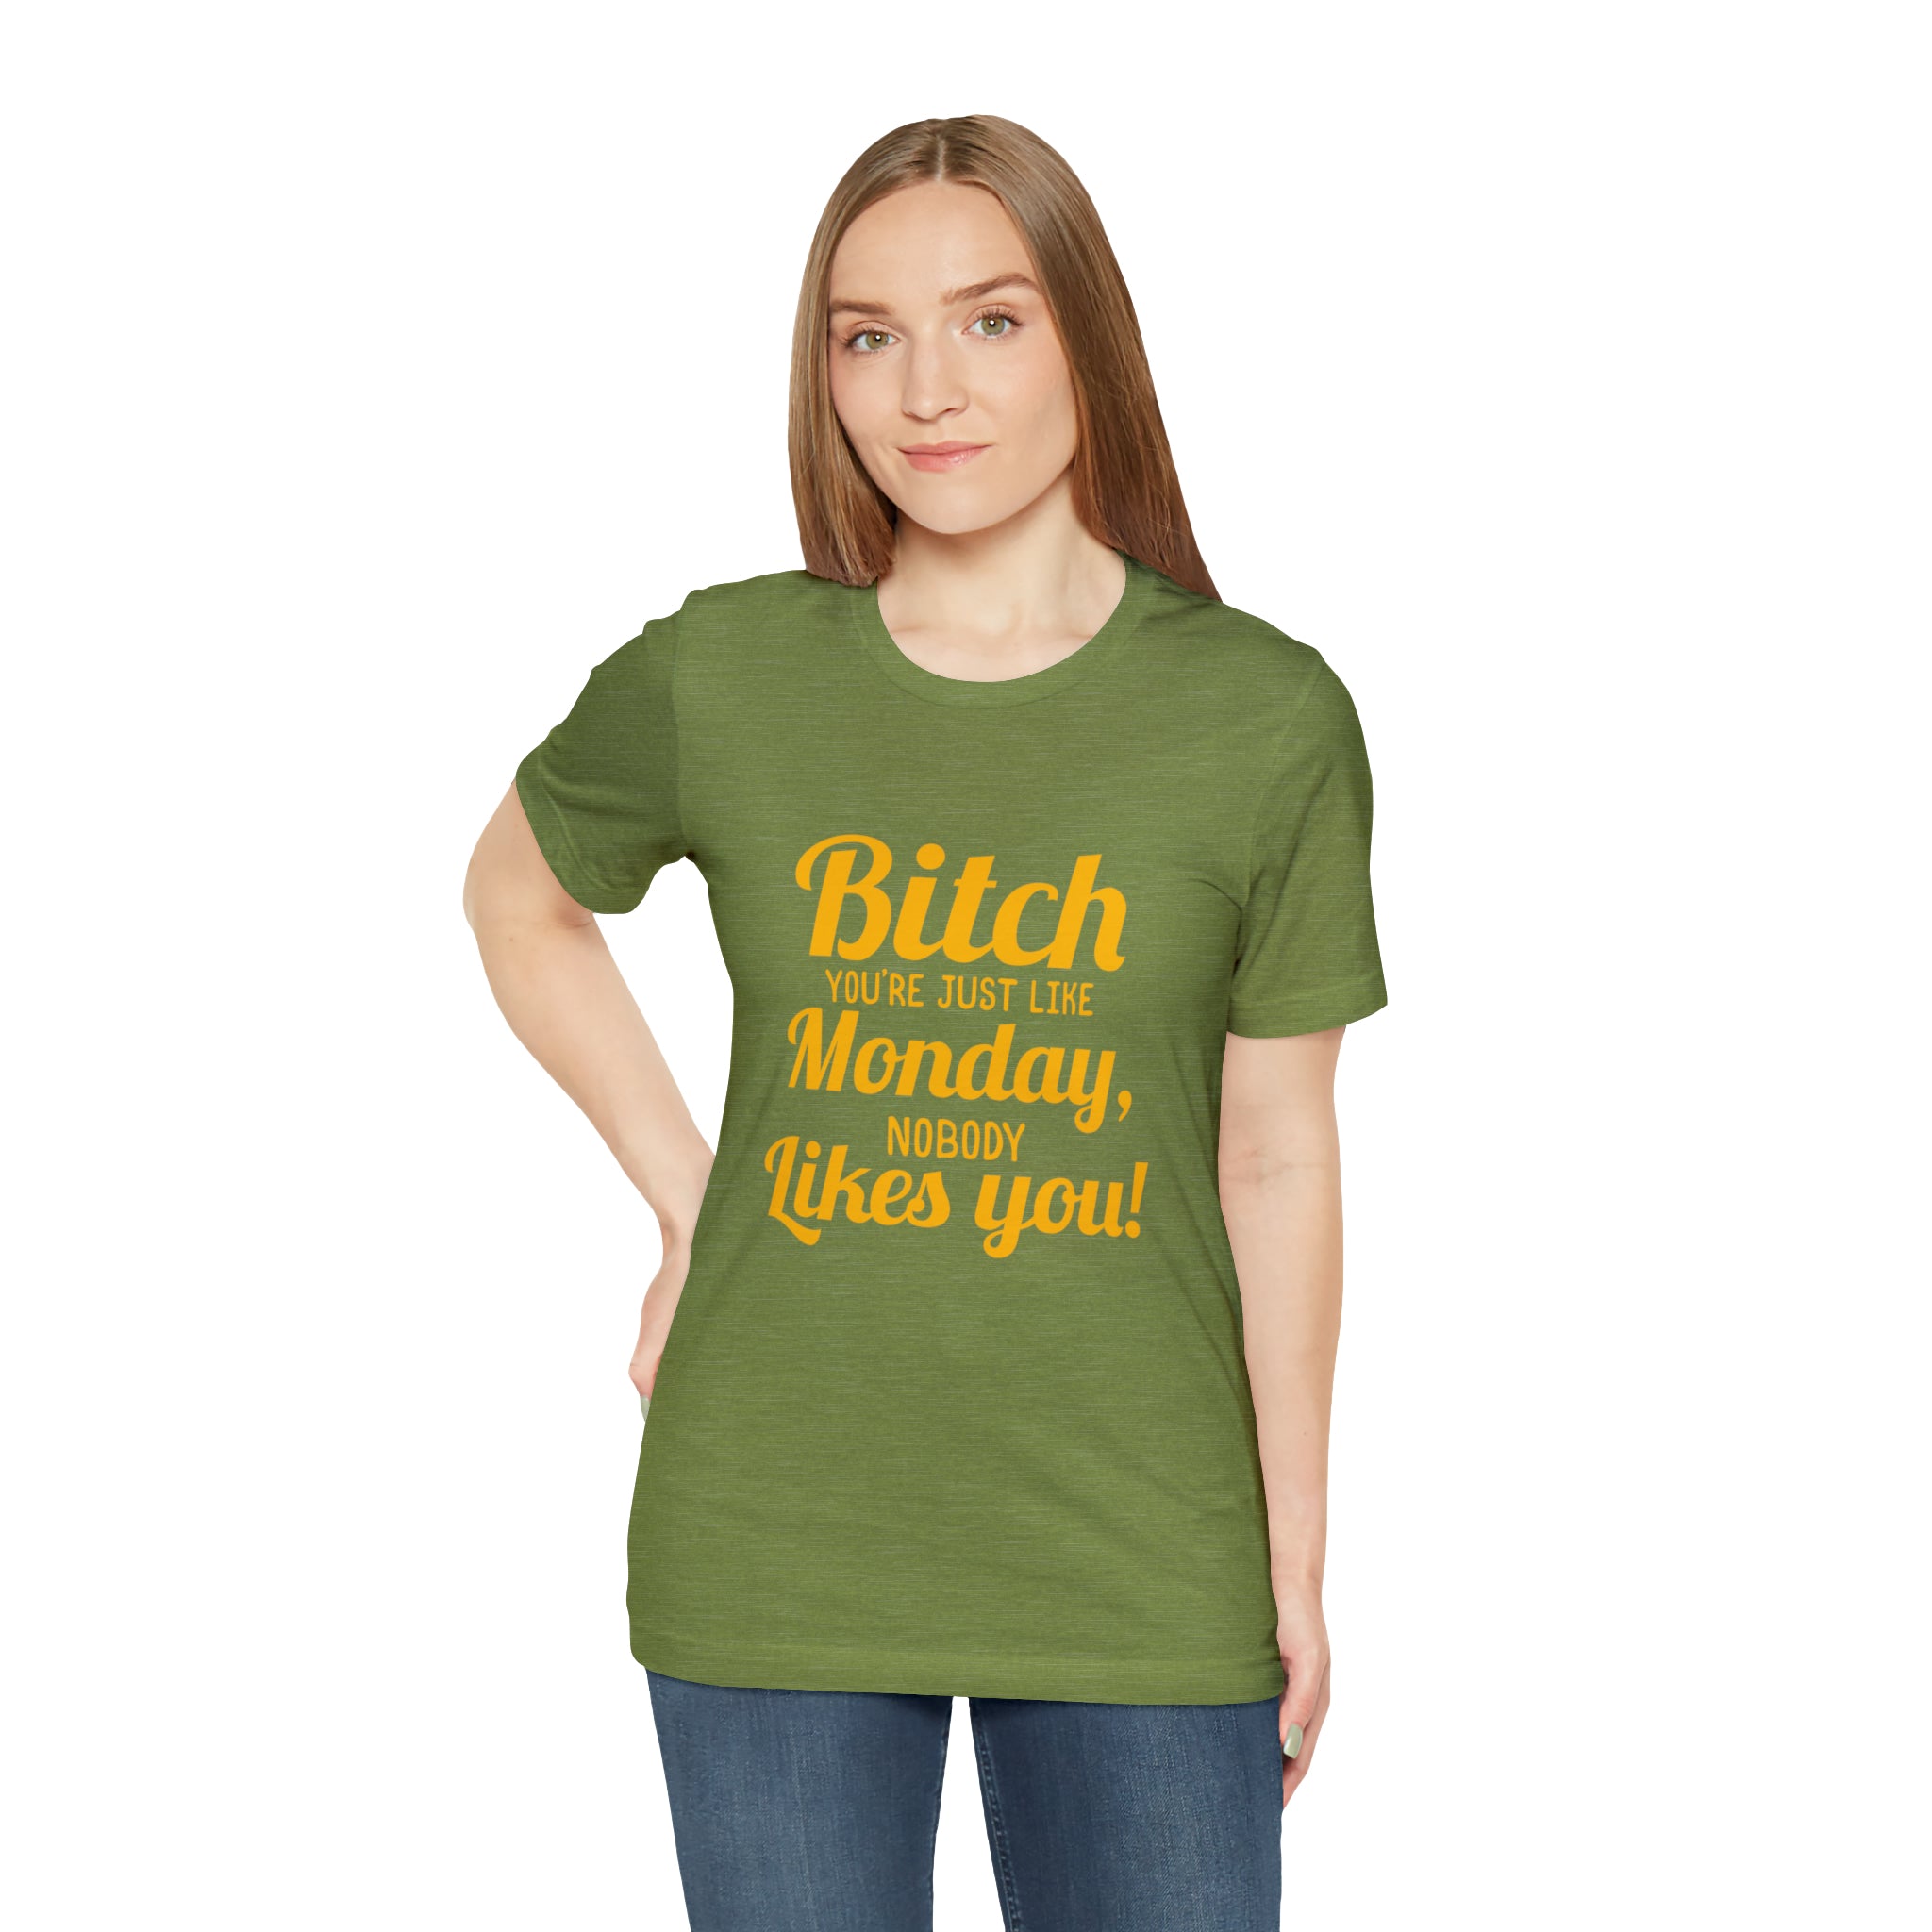 A woman wearing a "Bitch you are just like Monday nobody likes you" T-Shirt likes you.